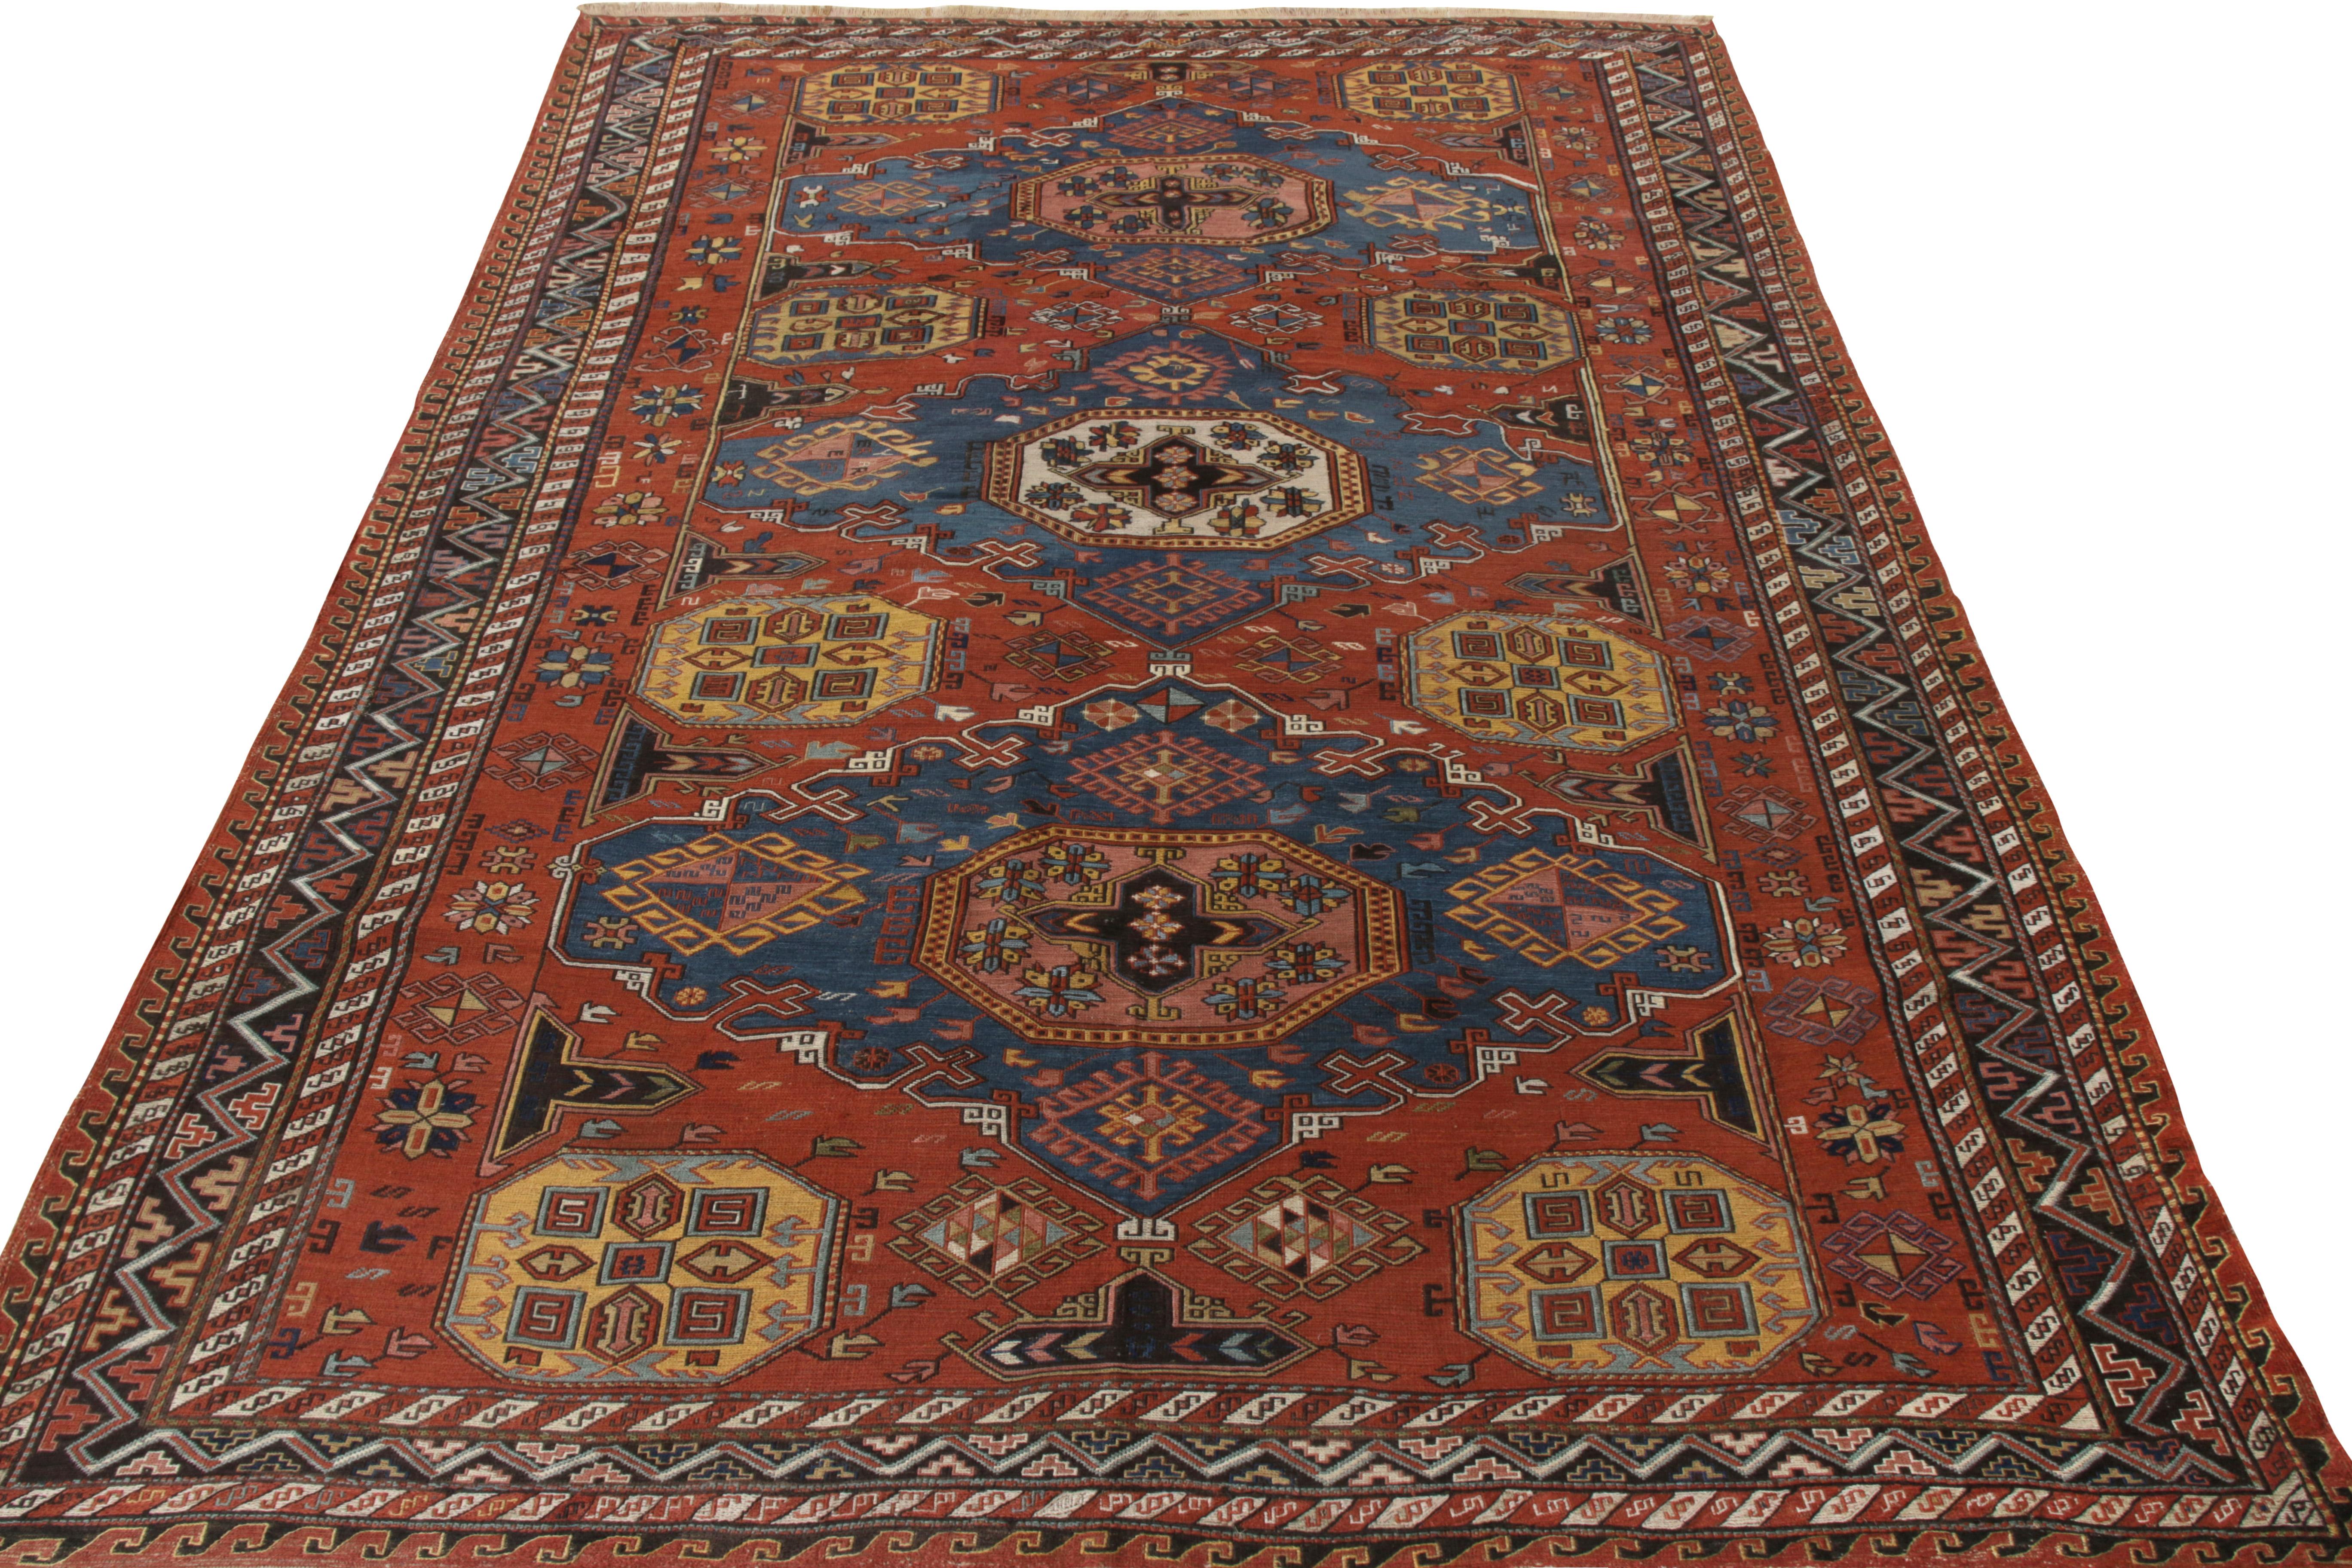 Hand-knotted in wool, an antique 7 x 9 Soumak rug originating from Russia circa 1920-1930. Joining Rug & Kilim’s Antique & Vintage collection, the piece showcases richness in color with luscious tones of blue & rust playing harmoniously with yellow,